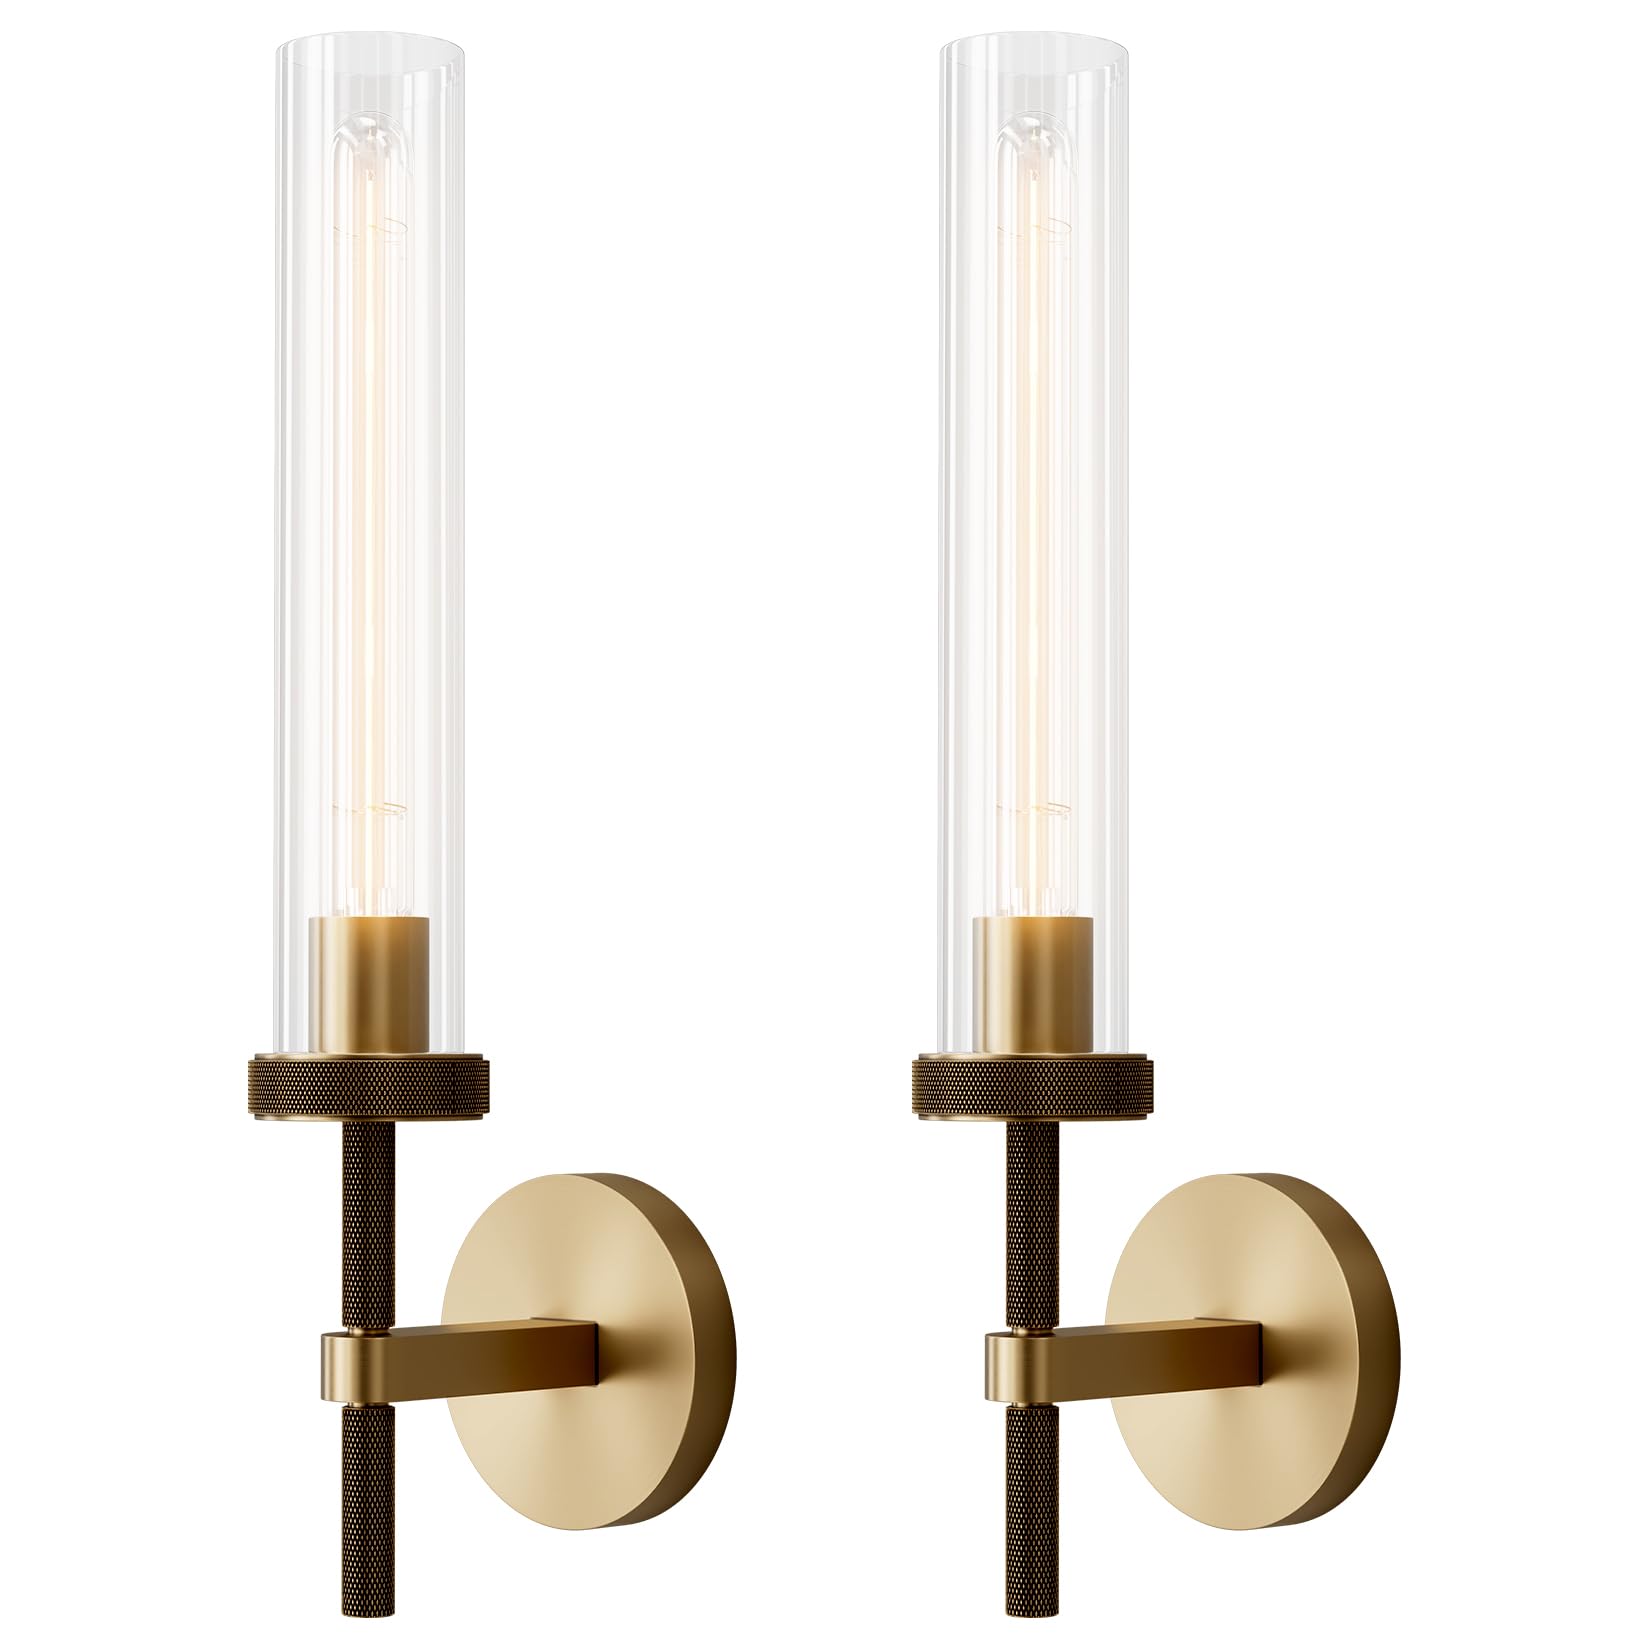 Gold sconces Wall Lighting, 19" Knurling Brass Wall Sconces Set of Two,Bathroom Vanity Light Fixtures, Modern Wall Lights for Mirror Living Room Hallway,Staircase